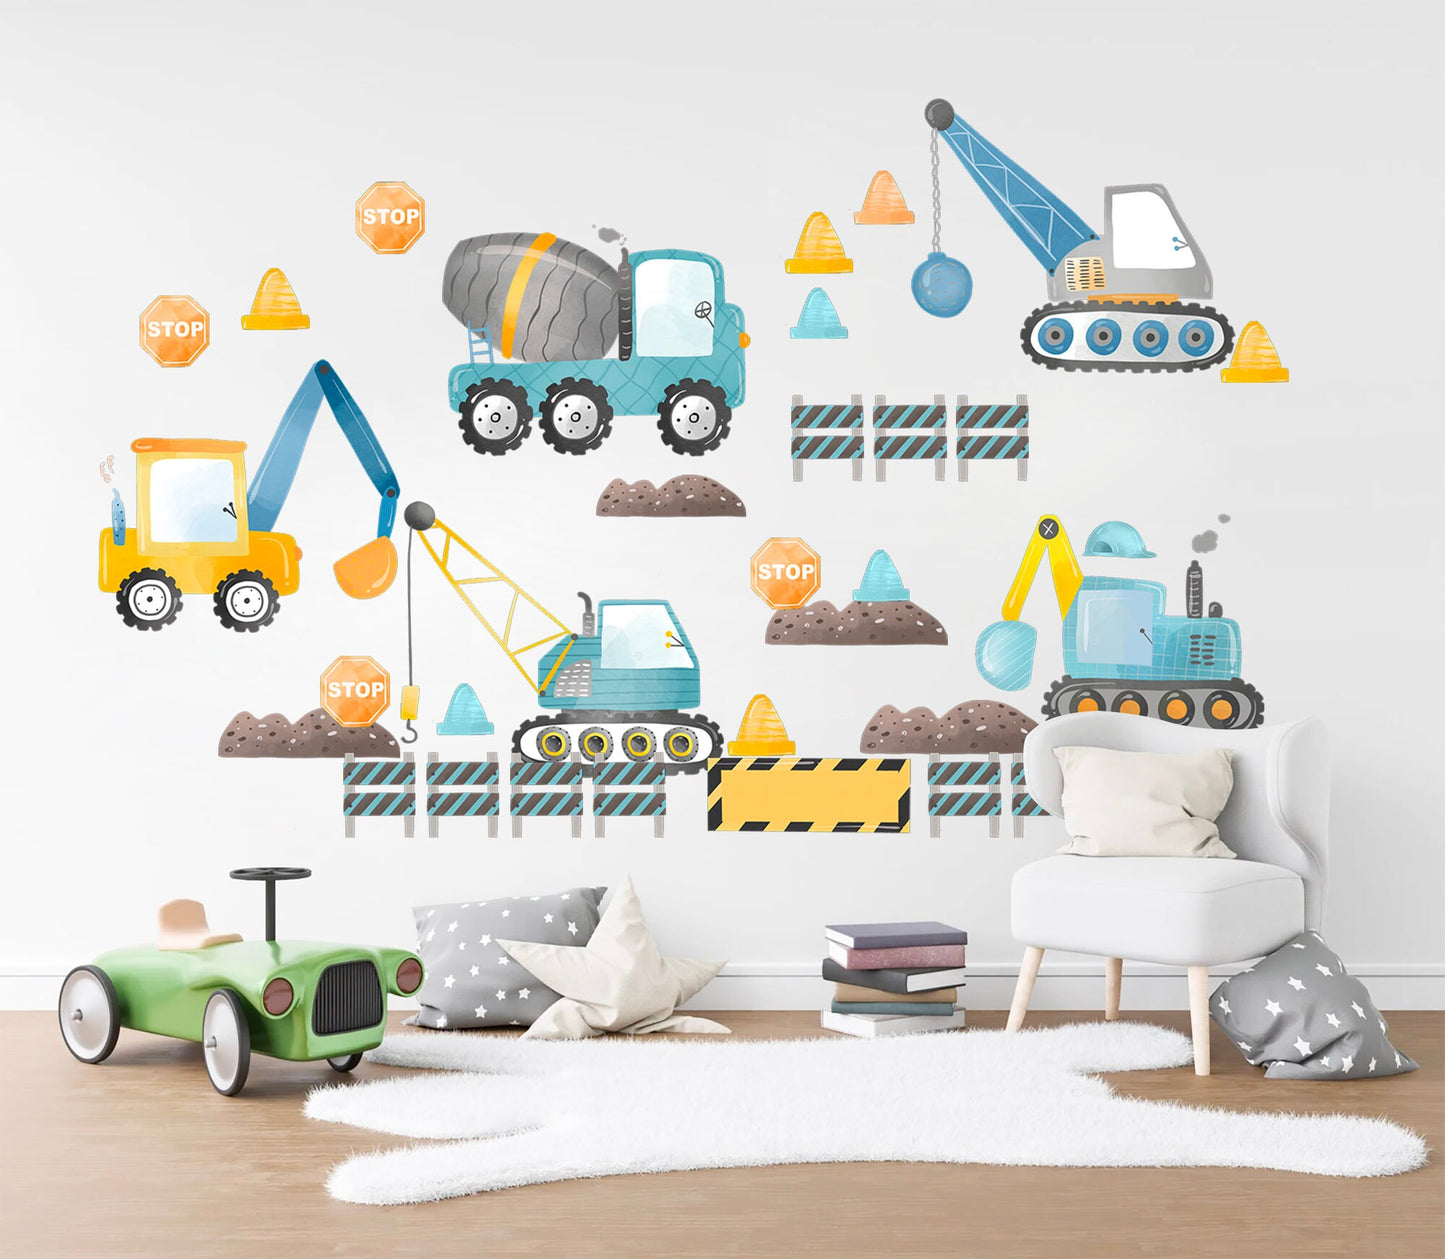 Construction Vehicles Crane Truck Mixer Digger Removable Wall Decal Boys Room Gift - BR289